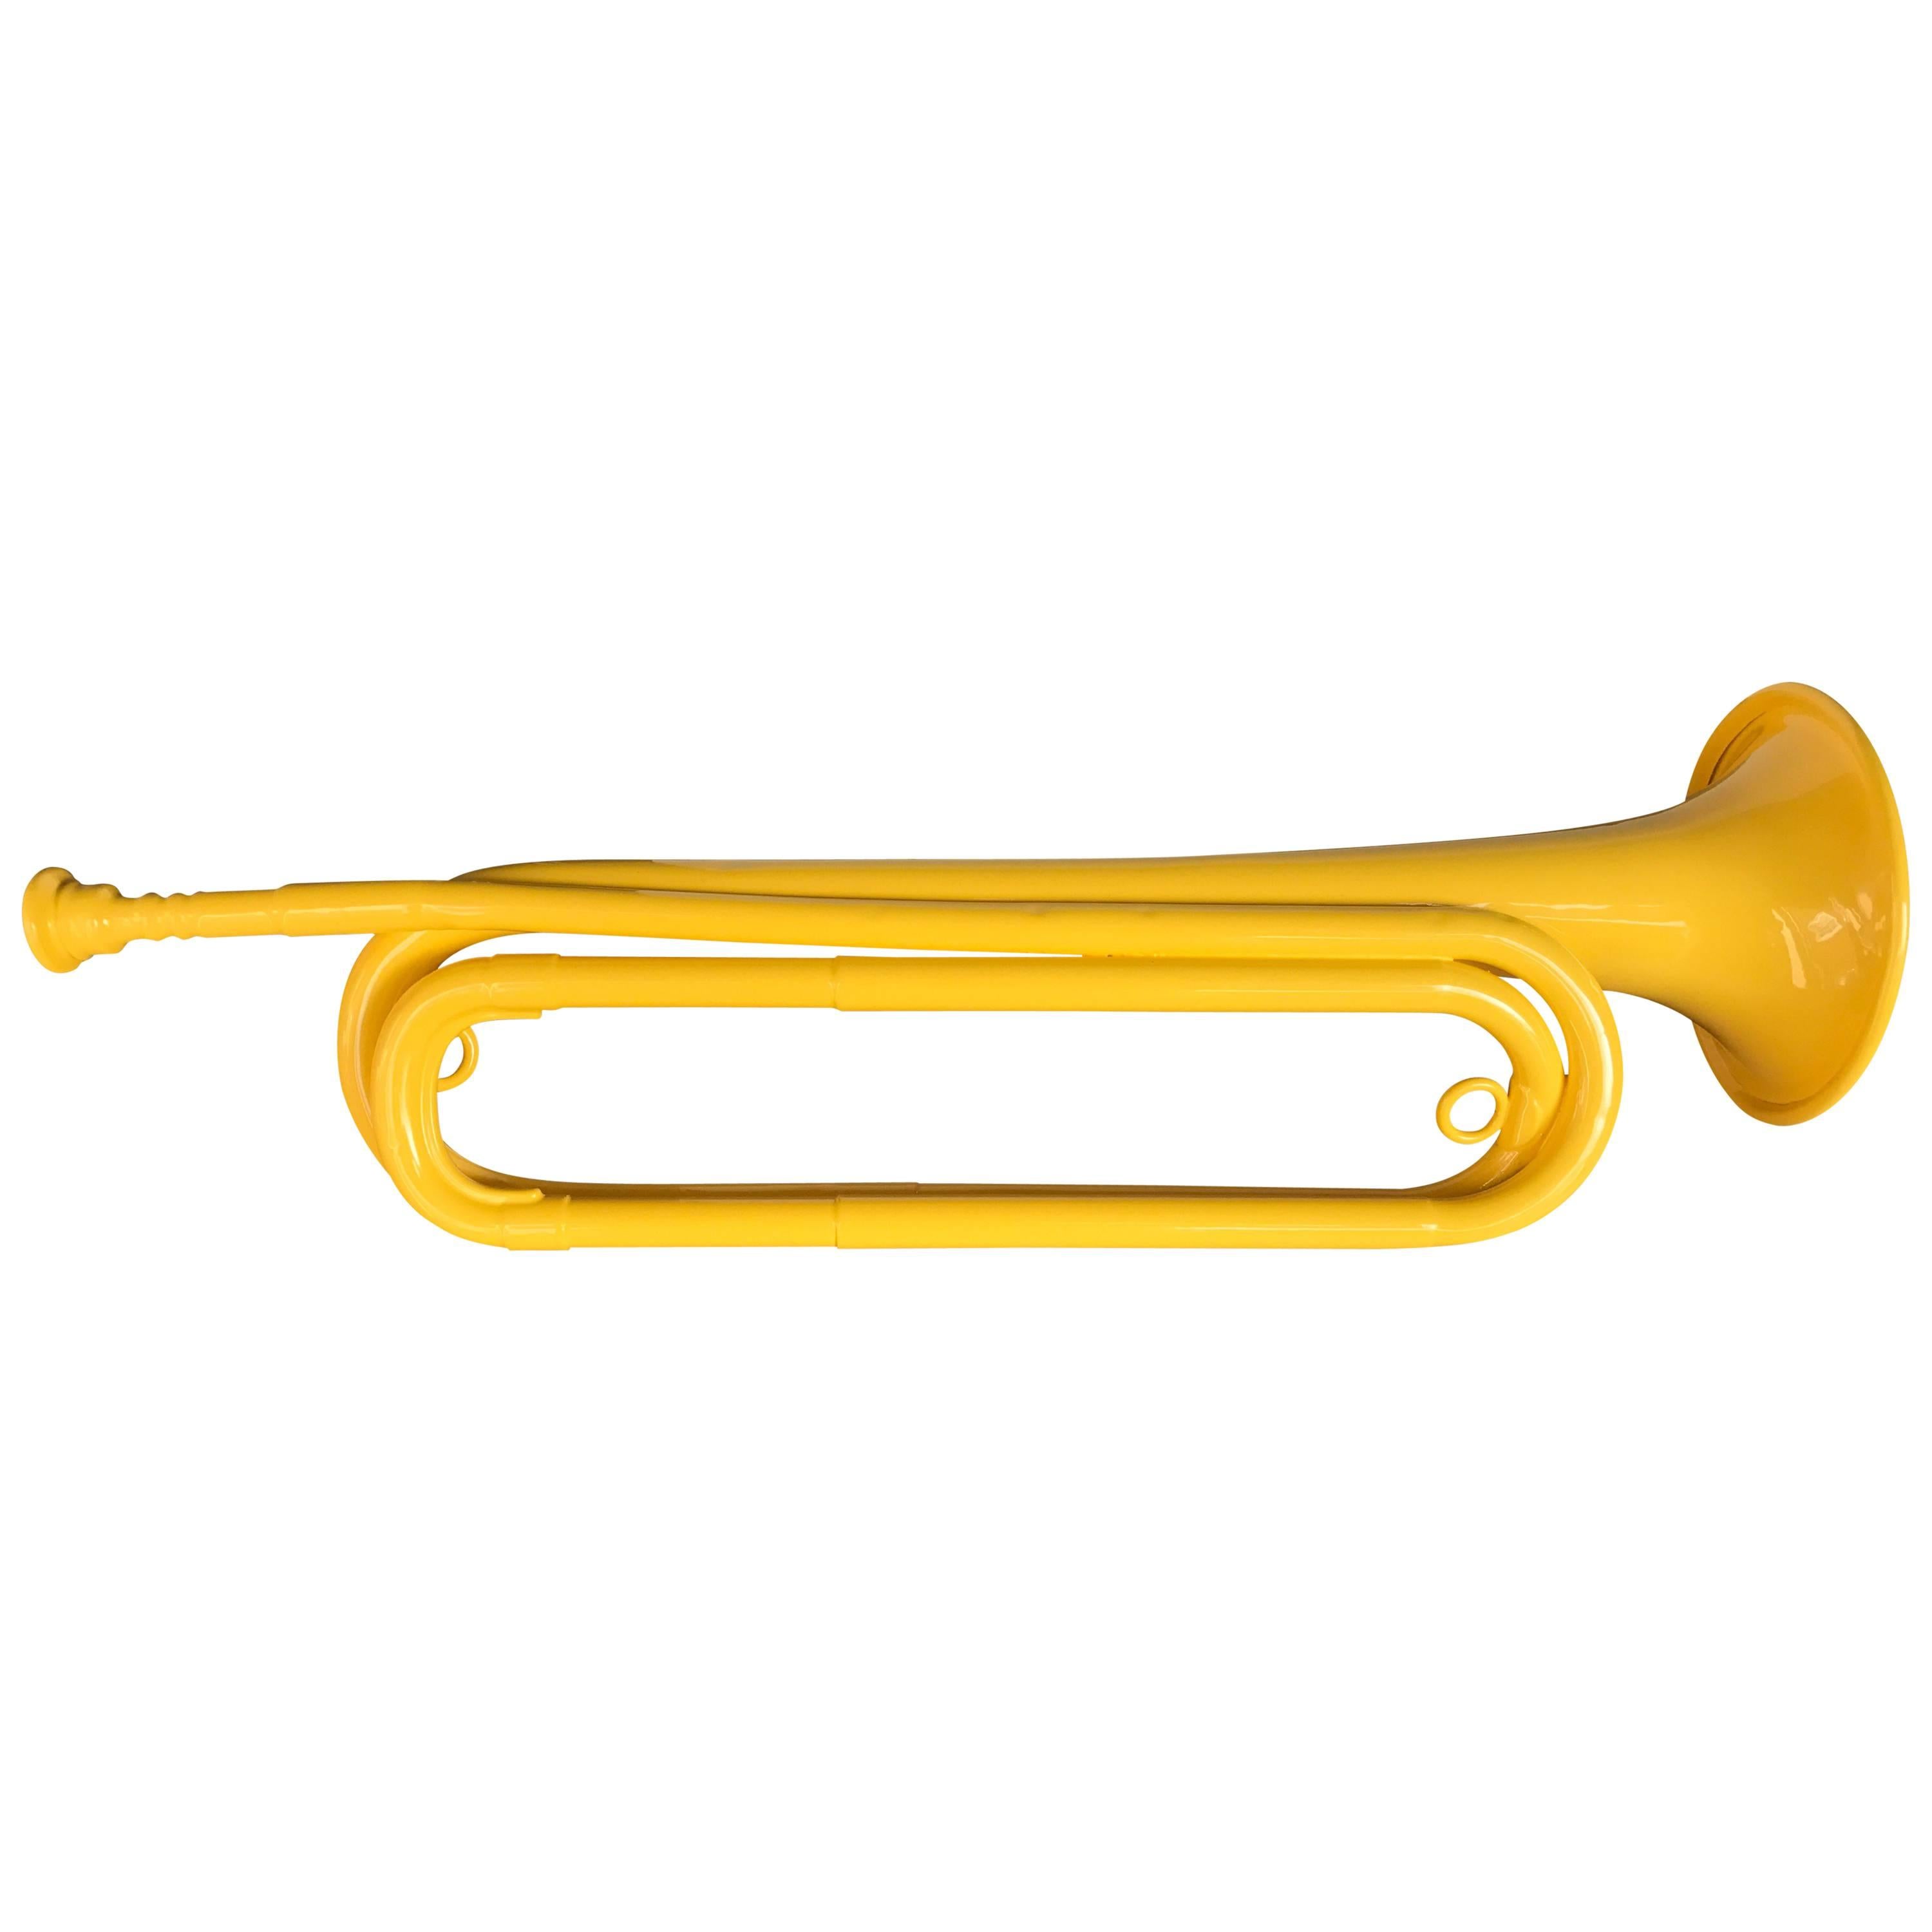 Vintage Bugle Or Trumpet In Bright Yellow Powdercoating